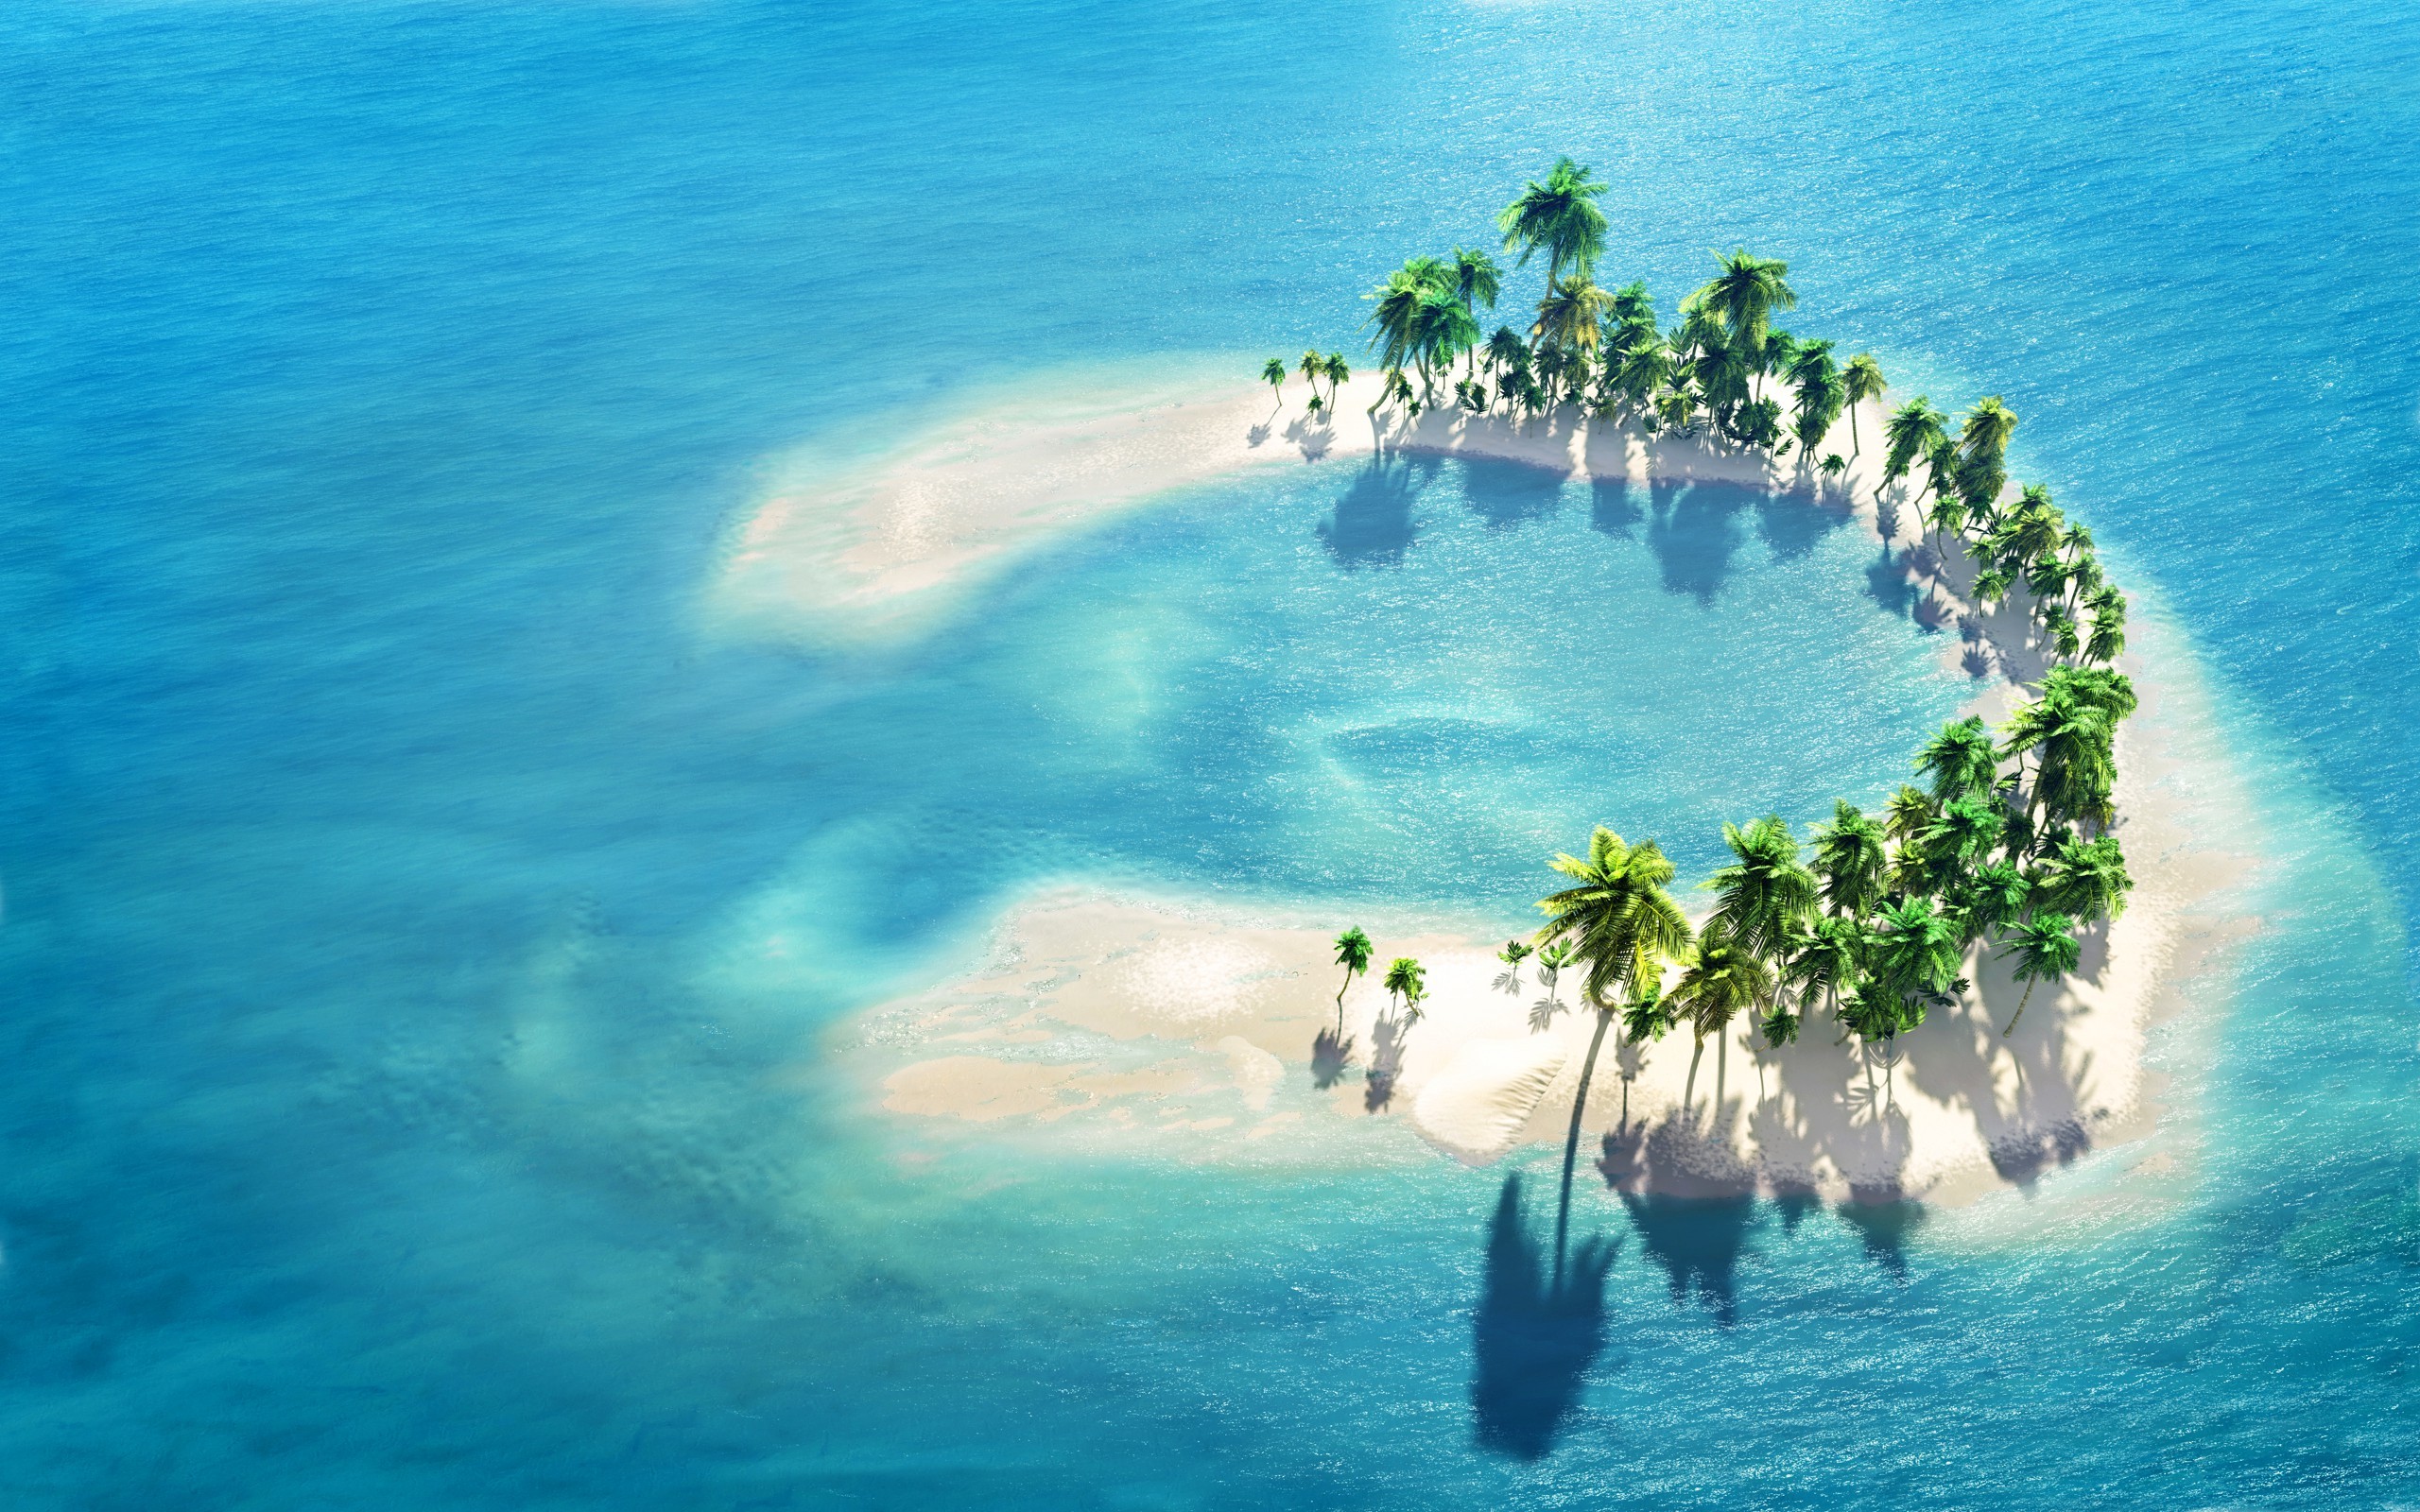 An island with palm trees in the shape of a horseshoe